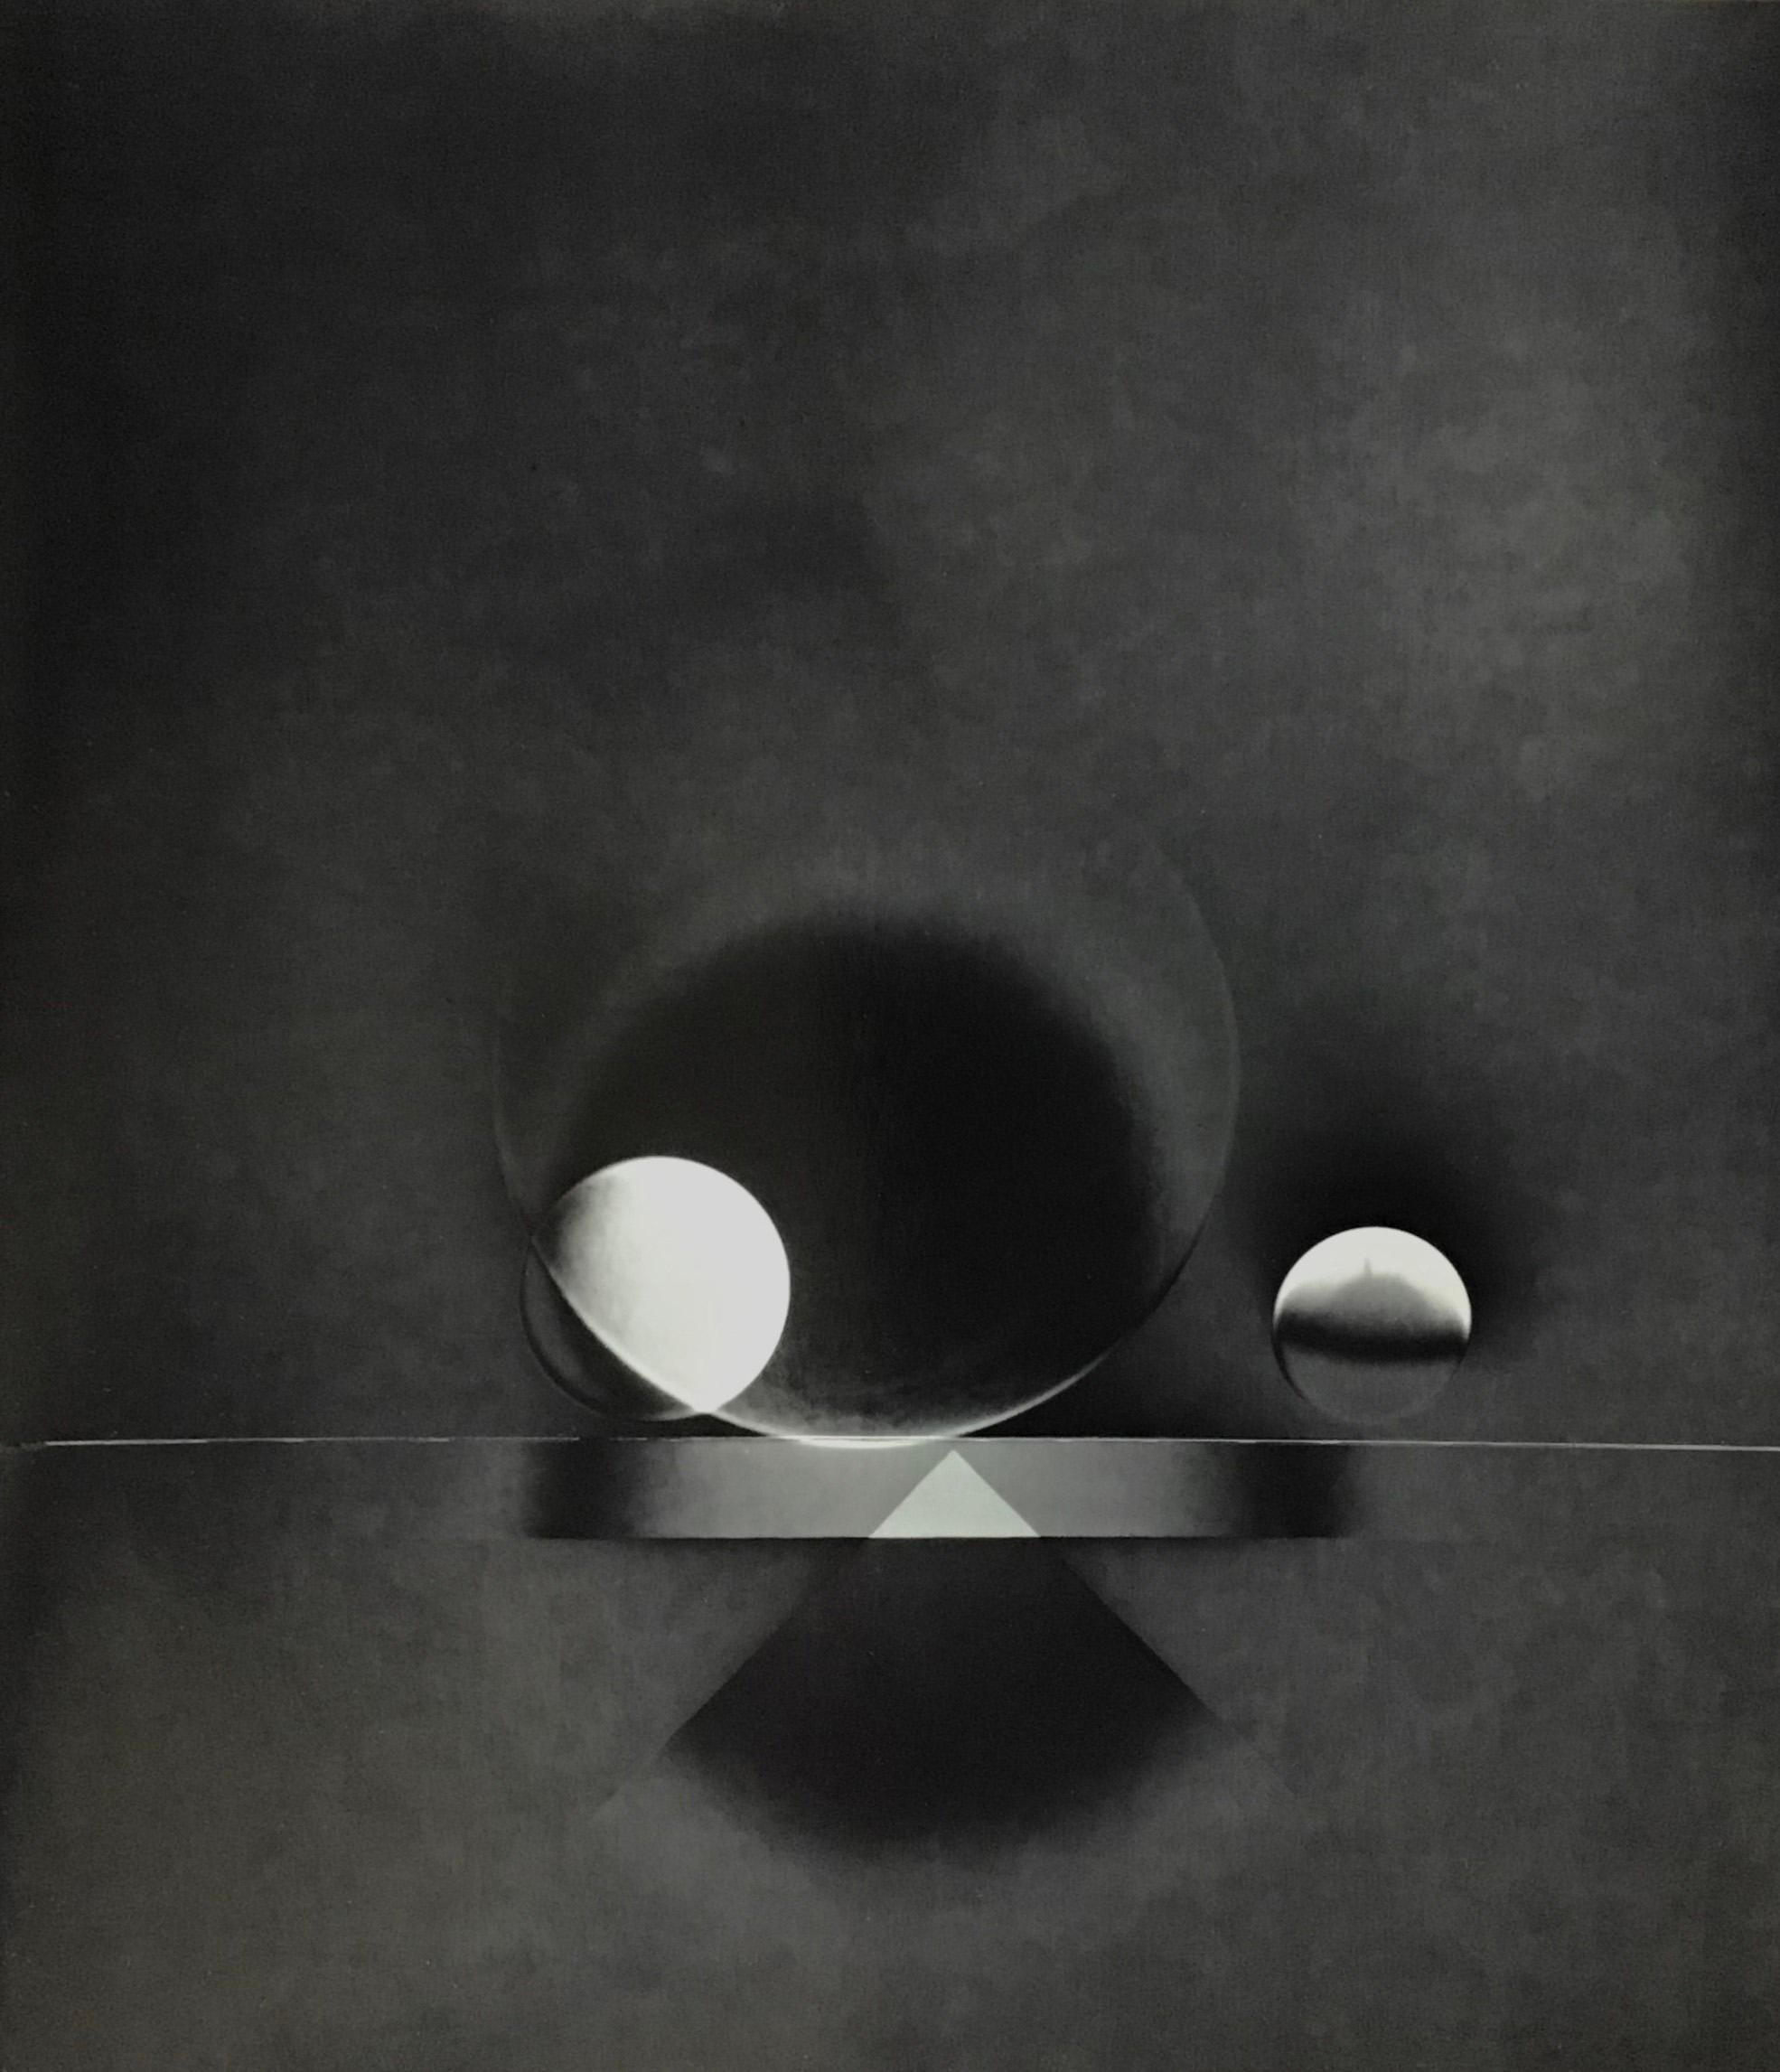 Abstract Print Michael G Jackson  - ATO>MIC #13, Unique Silver Luminogram Print, Two spheres and triangle with shade